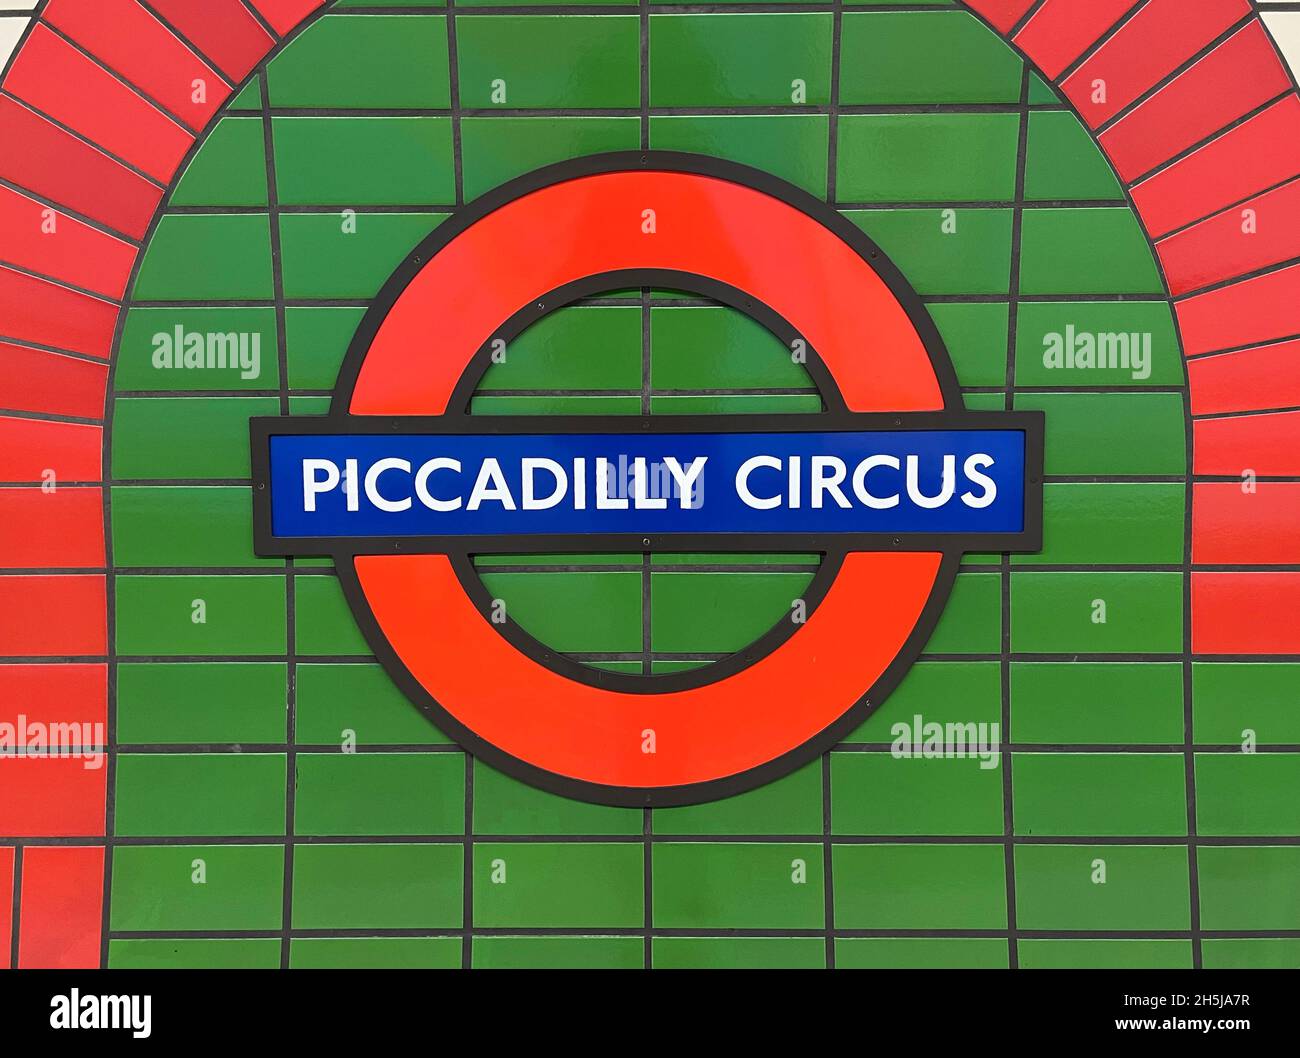 London / UK - 7th November 2021 - Piccadilly Circus station sign on a platform wall in the London underground Stock Photo